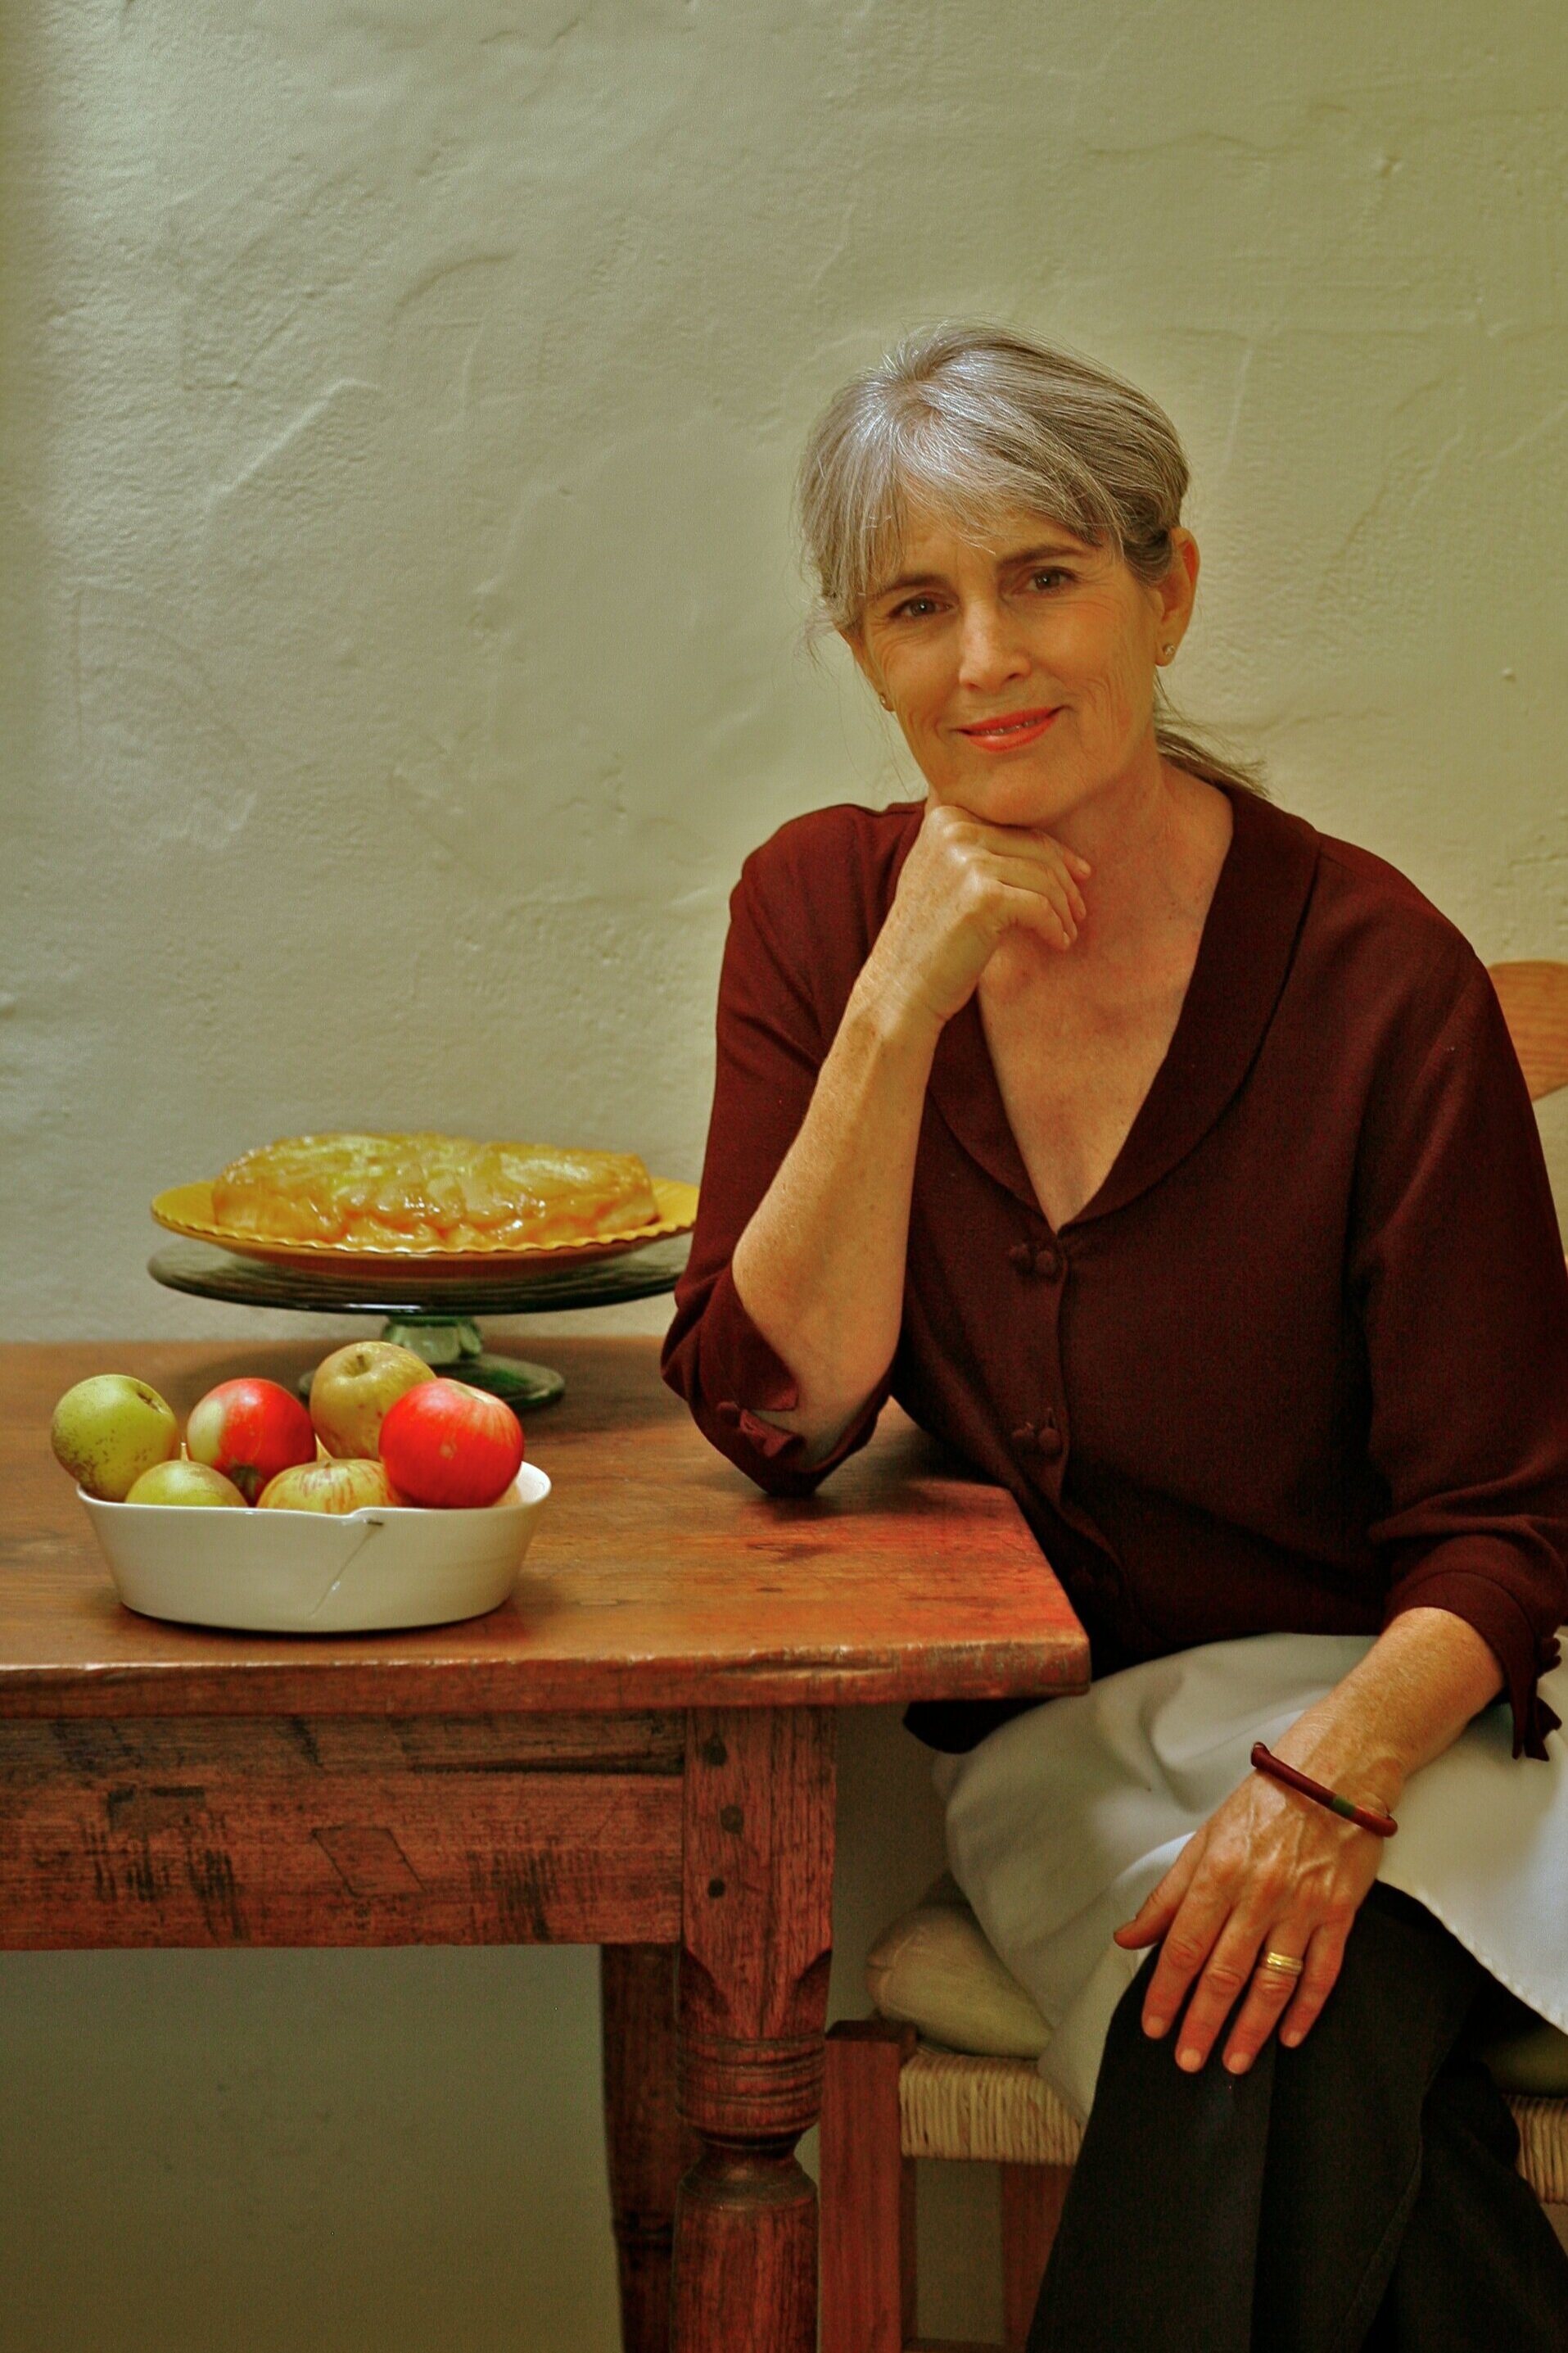 Deborah Madison has helped shaped attitudes to meat-free eating. Photograph: Laurie Smith